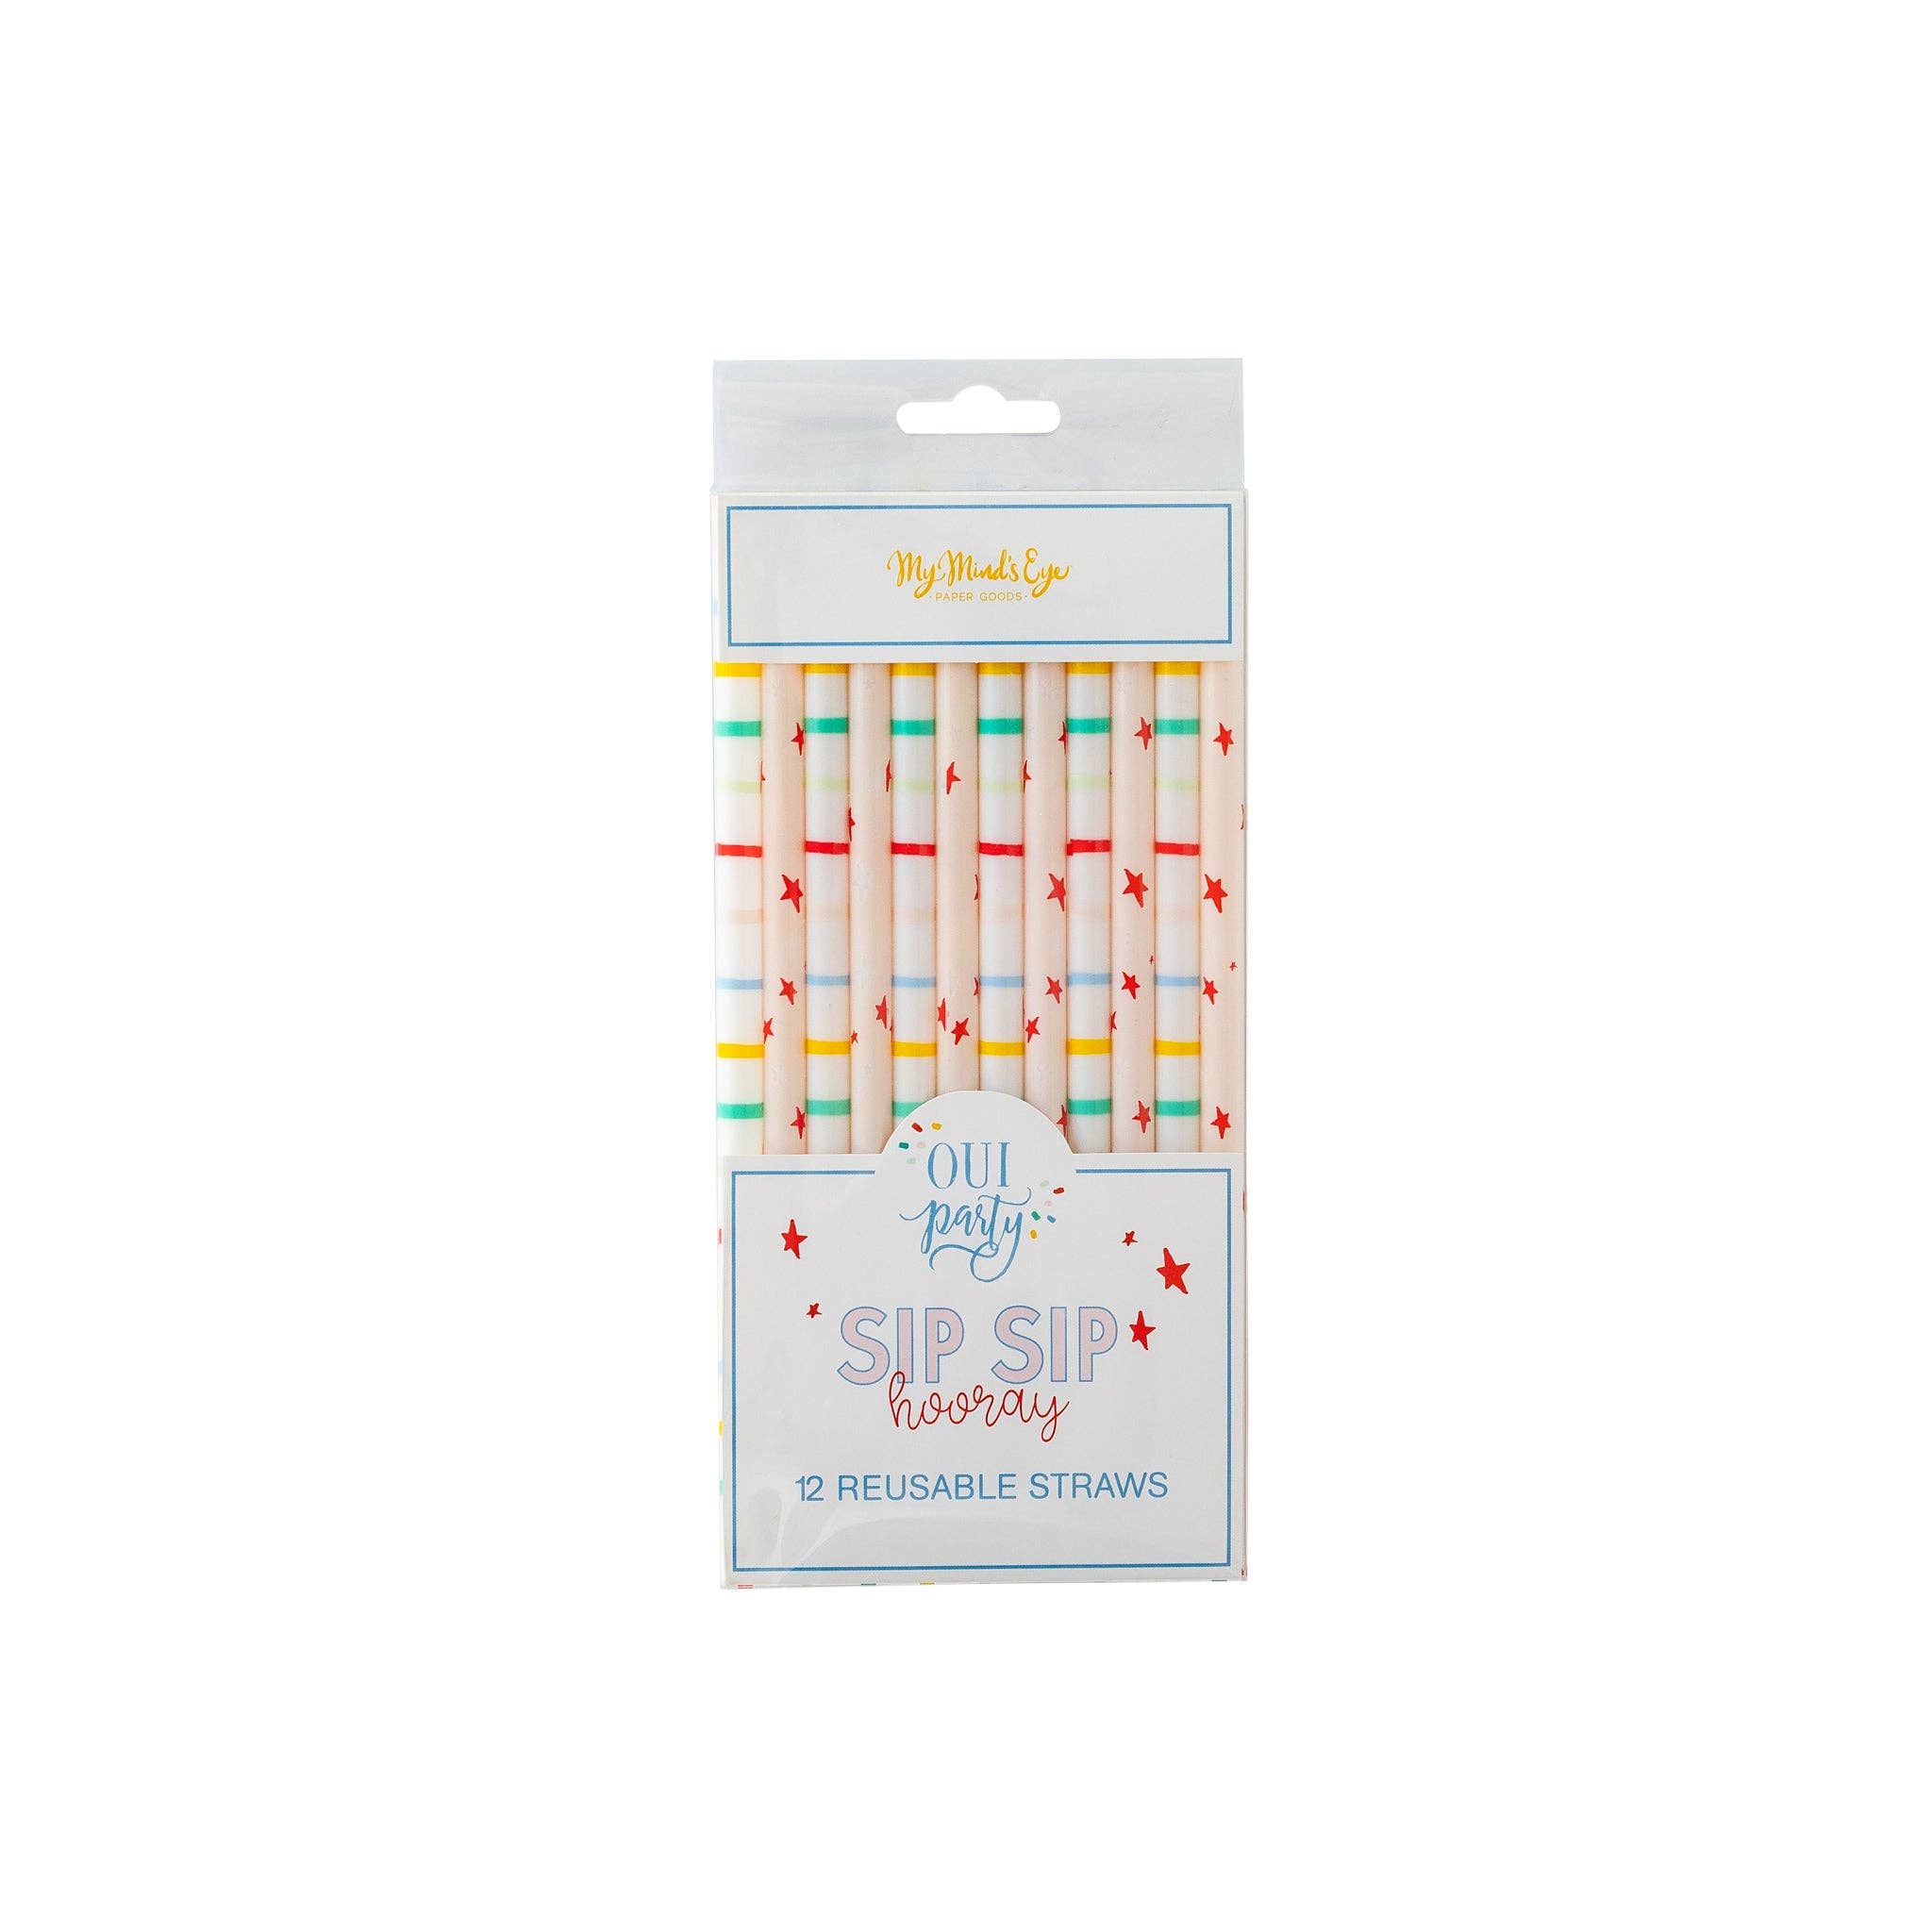 OPB813 - Oui Party Birthday Straws - Oh My Darling Party Co-Faire #Fringe_Backdrop#